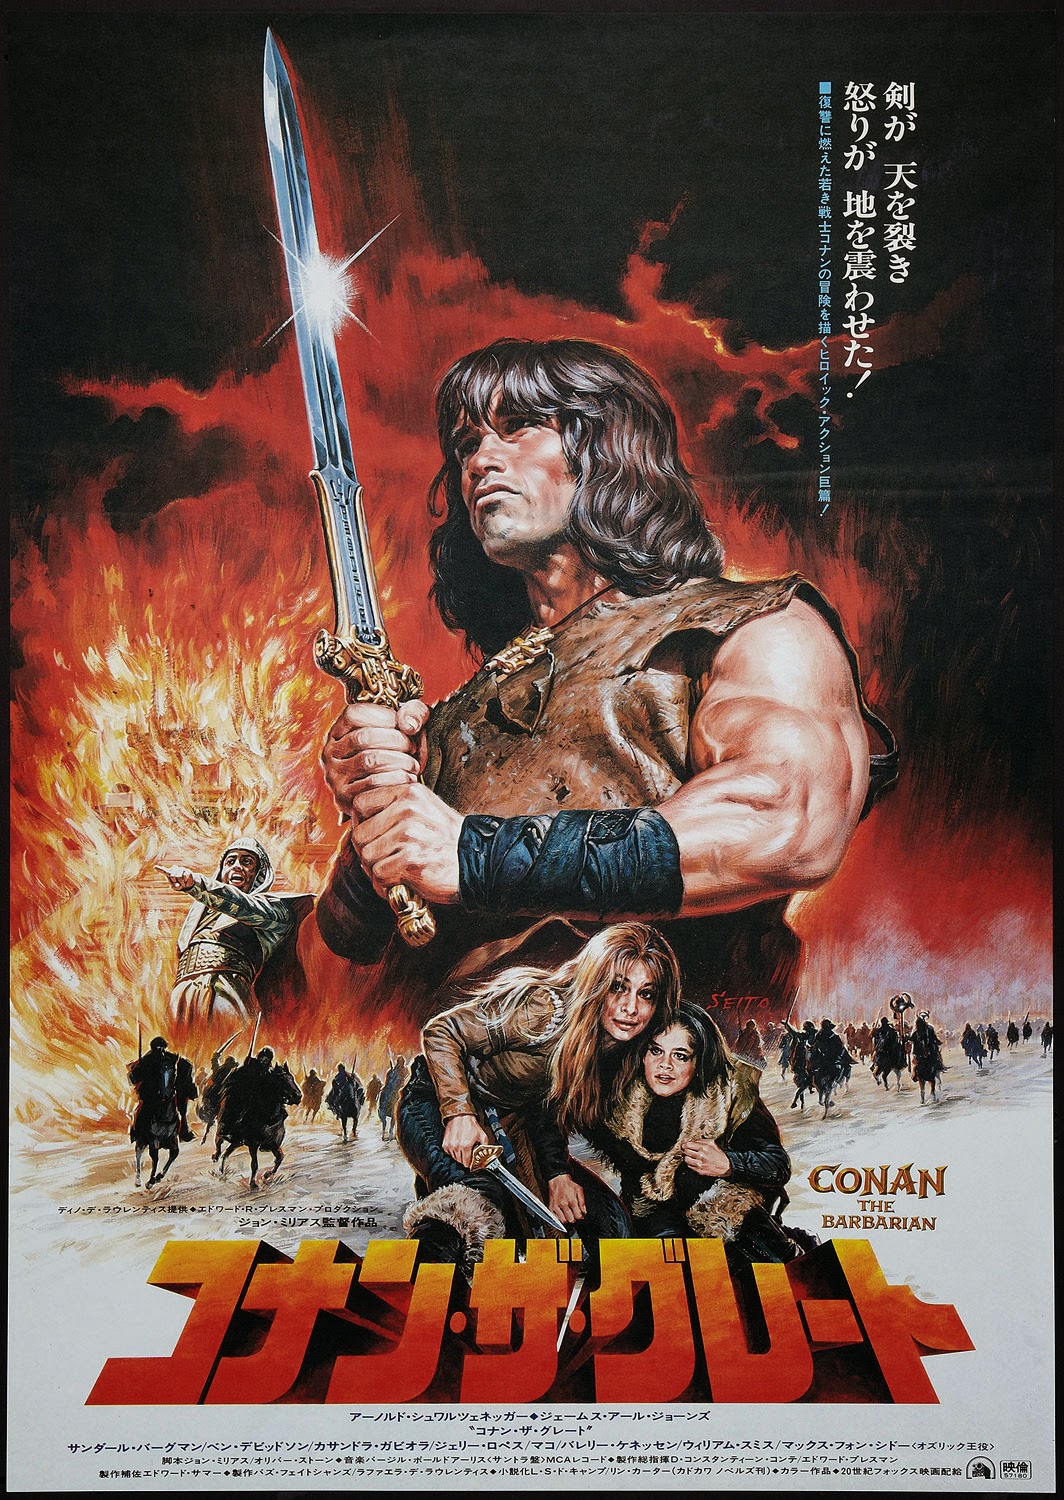 Conan the Barbarian (1982) | Amazing Movie Posters